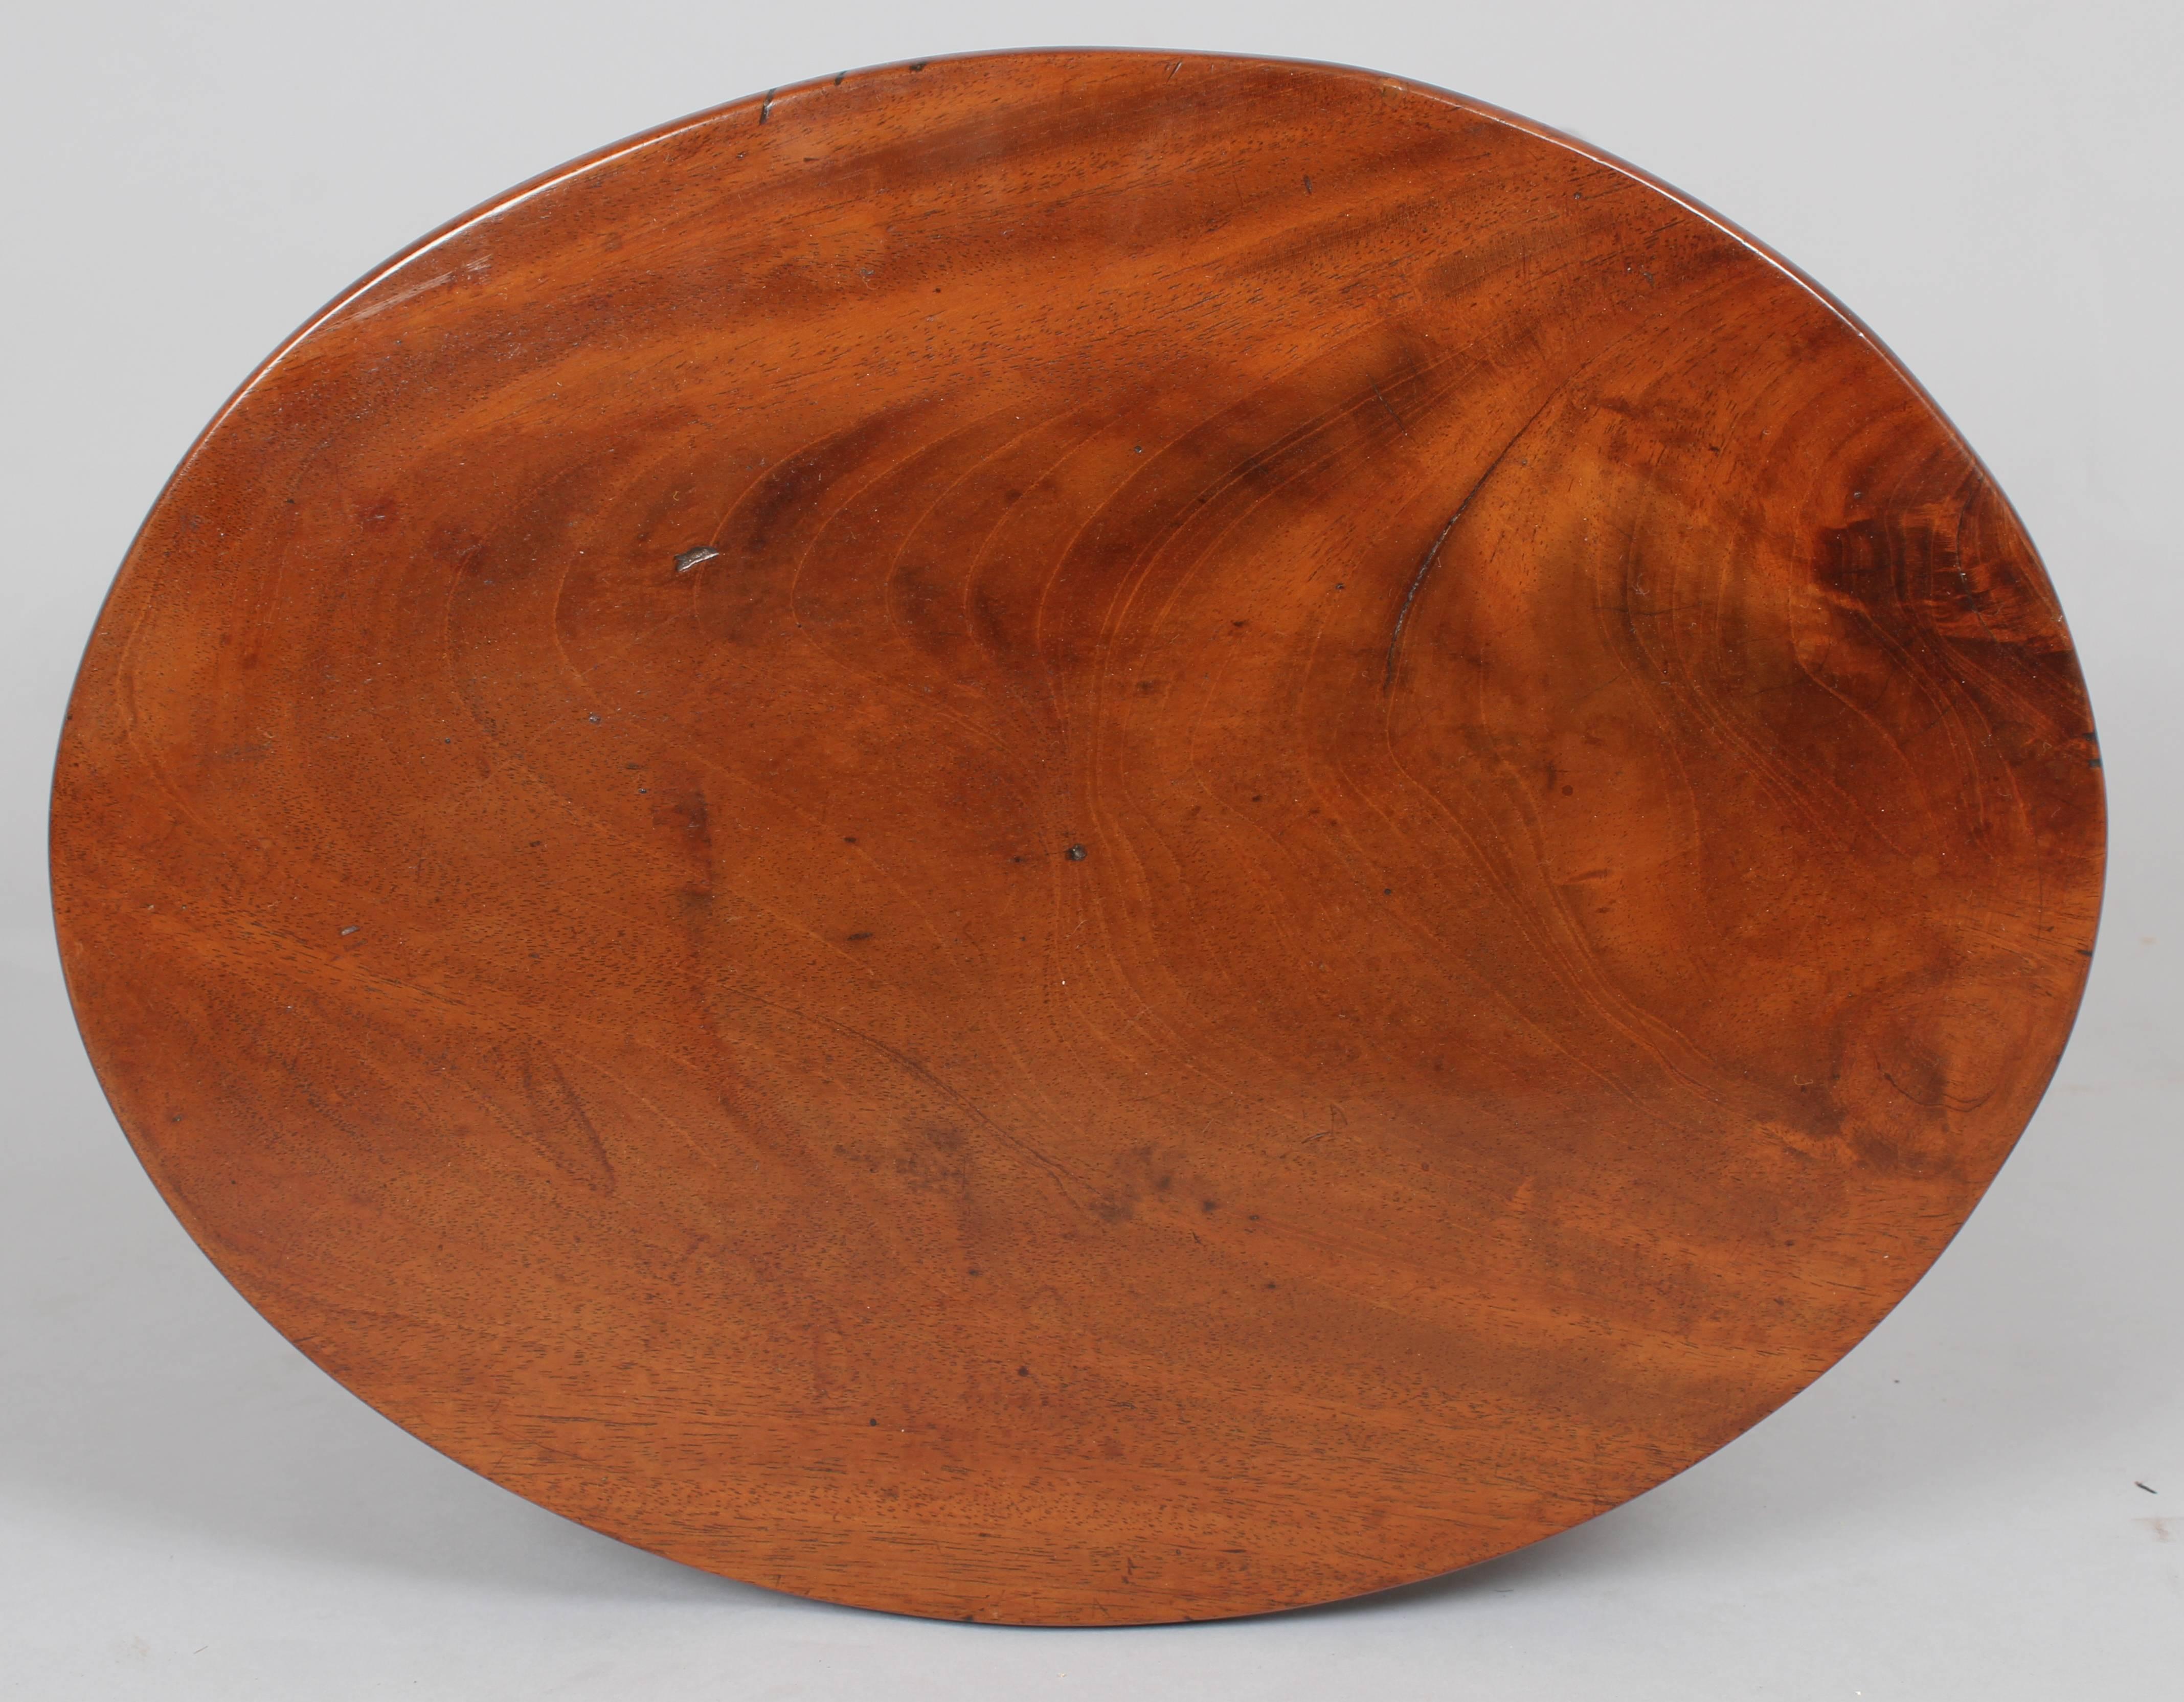 A simple George III period mahogany stool with an oval top and splayed tapering legs.